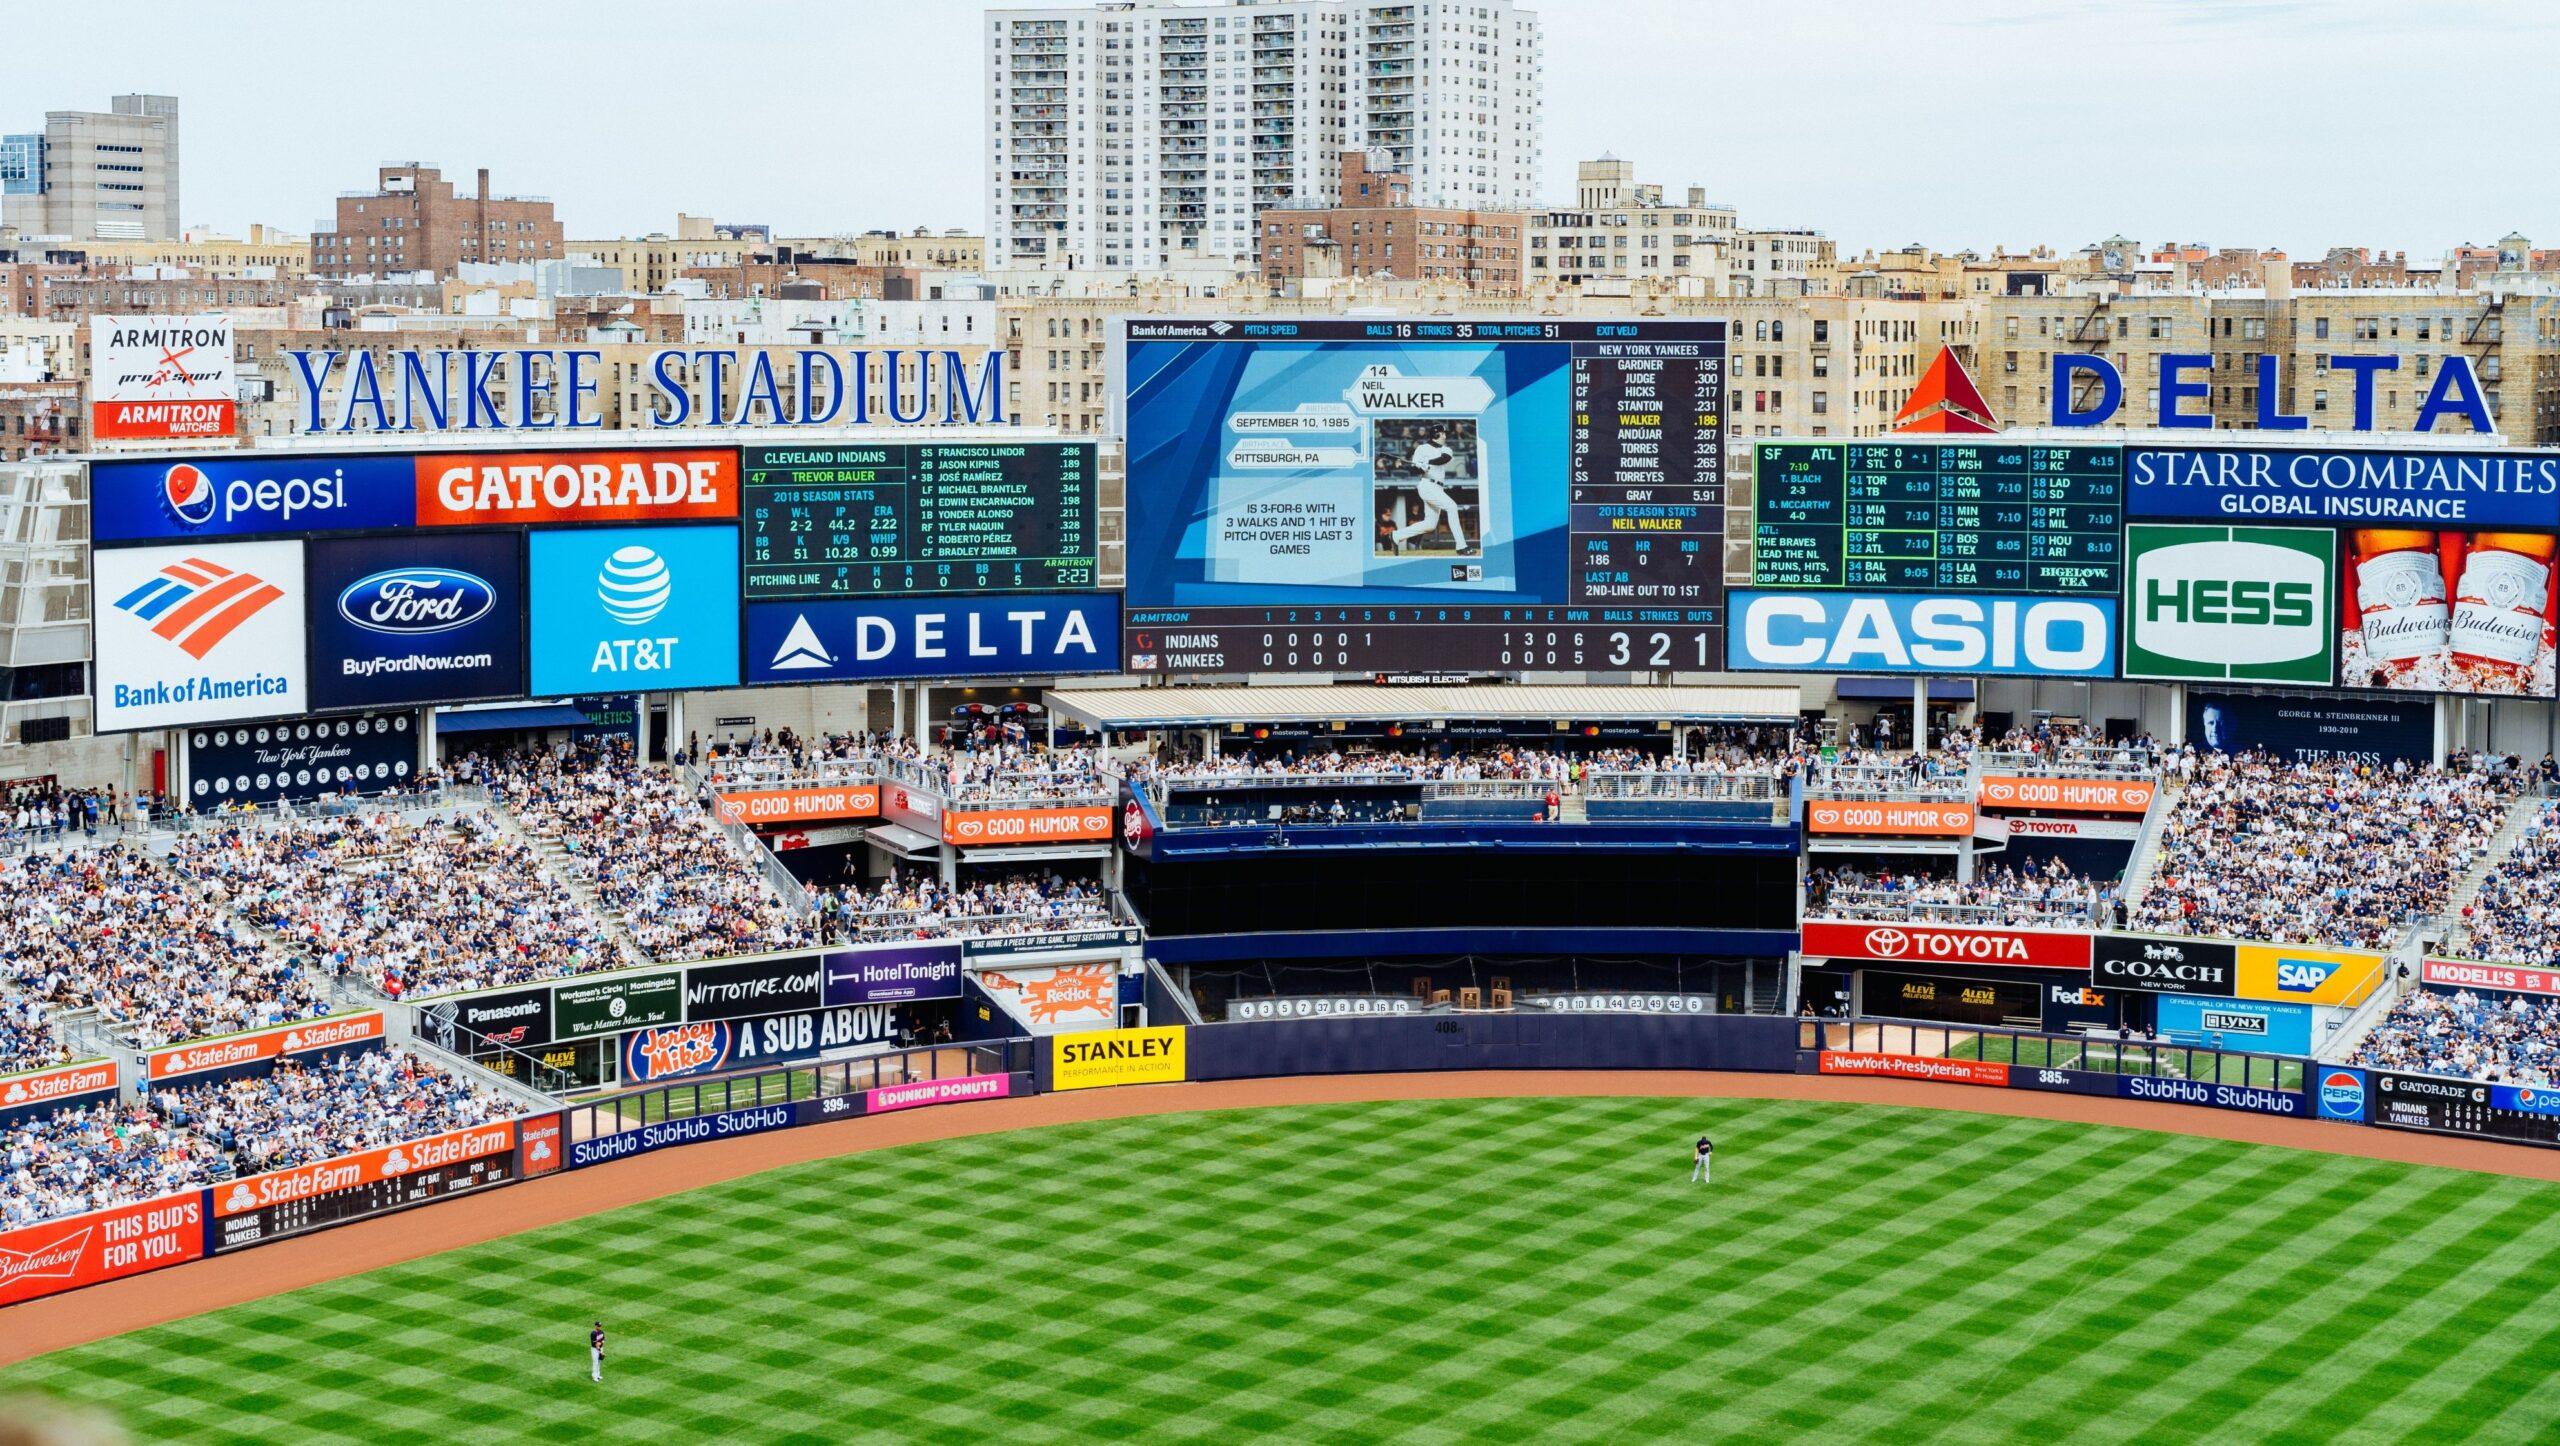 Yankee Stadium in New York pictured during a baseball game.